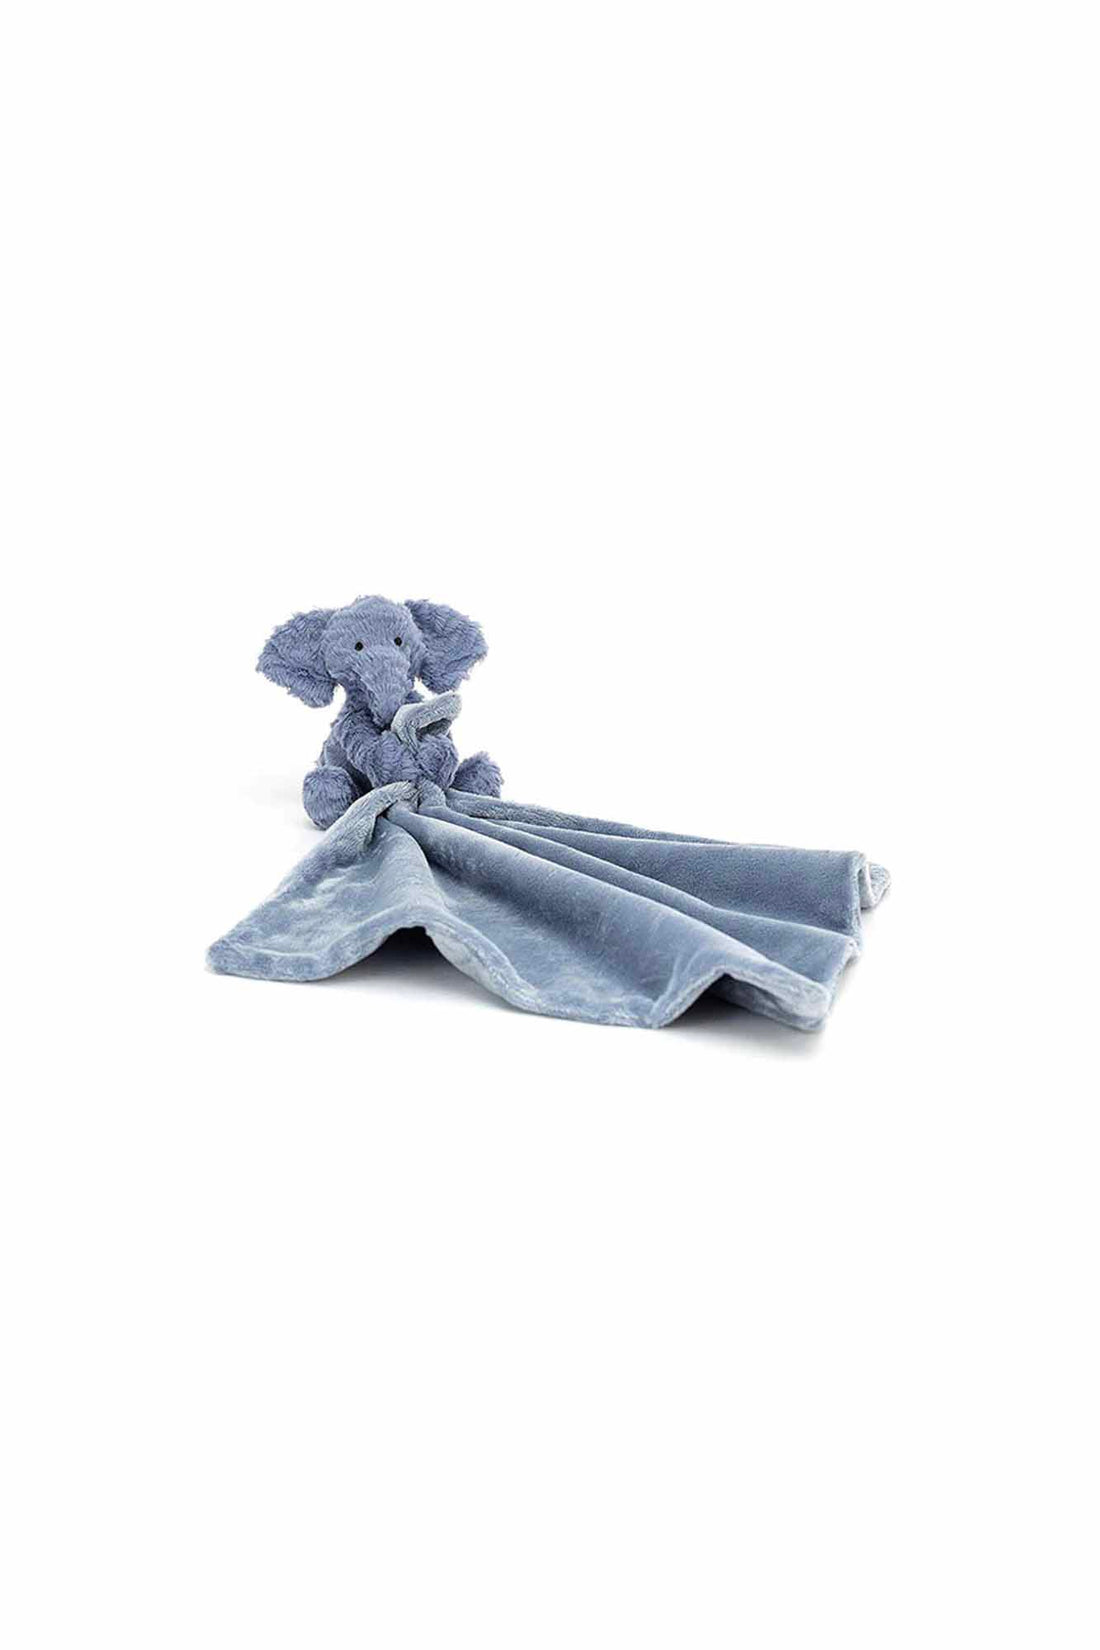 Personalisable Jellycat Fuddlewuddle Elephant Soother